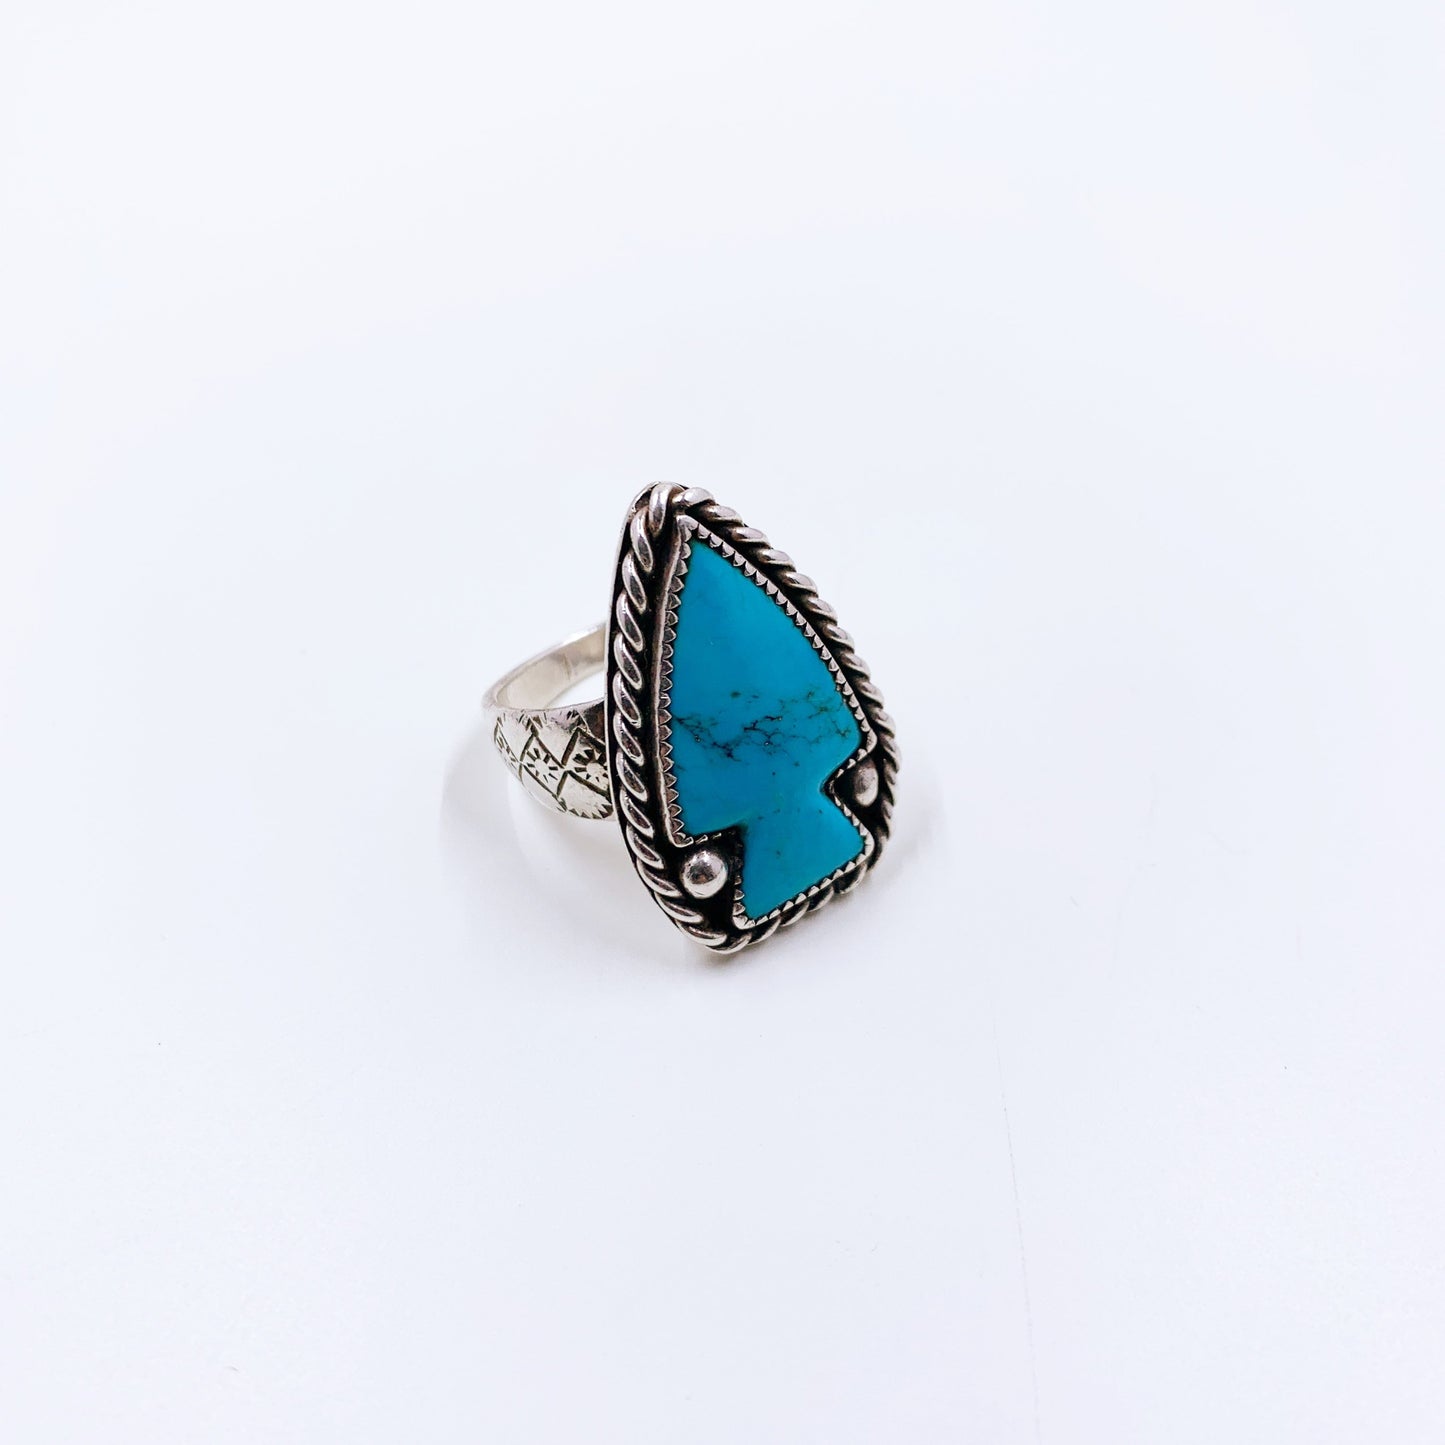 Vintage Turquoise Arrowhead Ring | Size 11 1/2 Ring